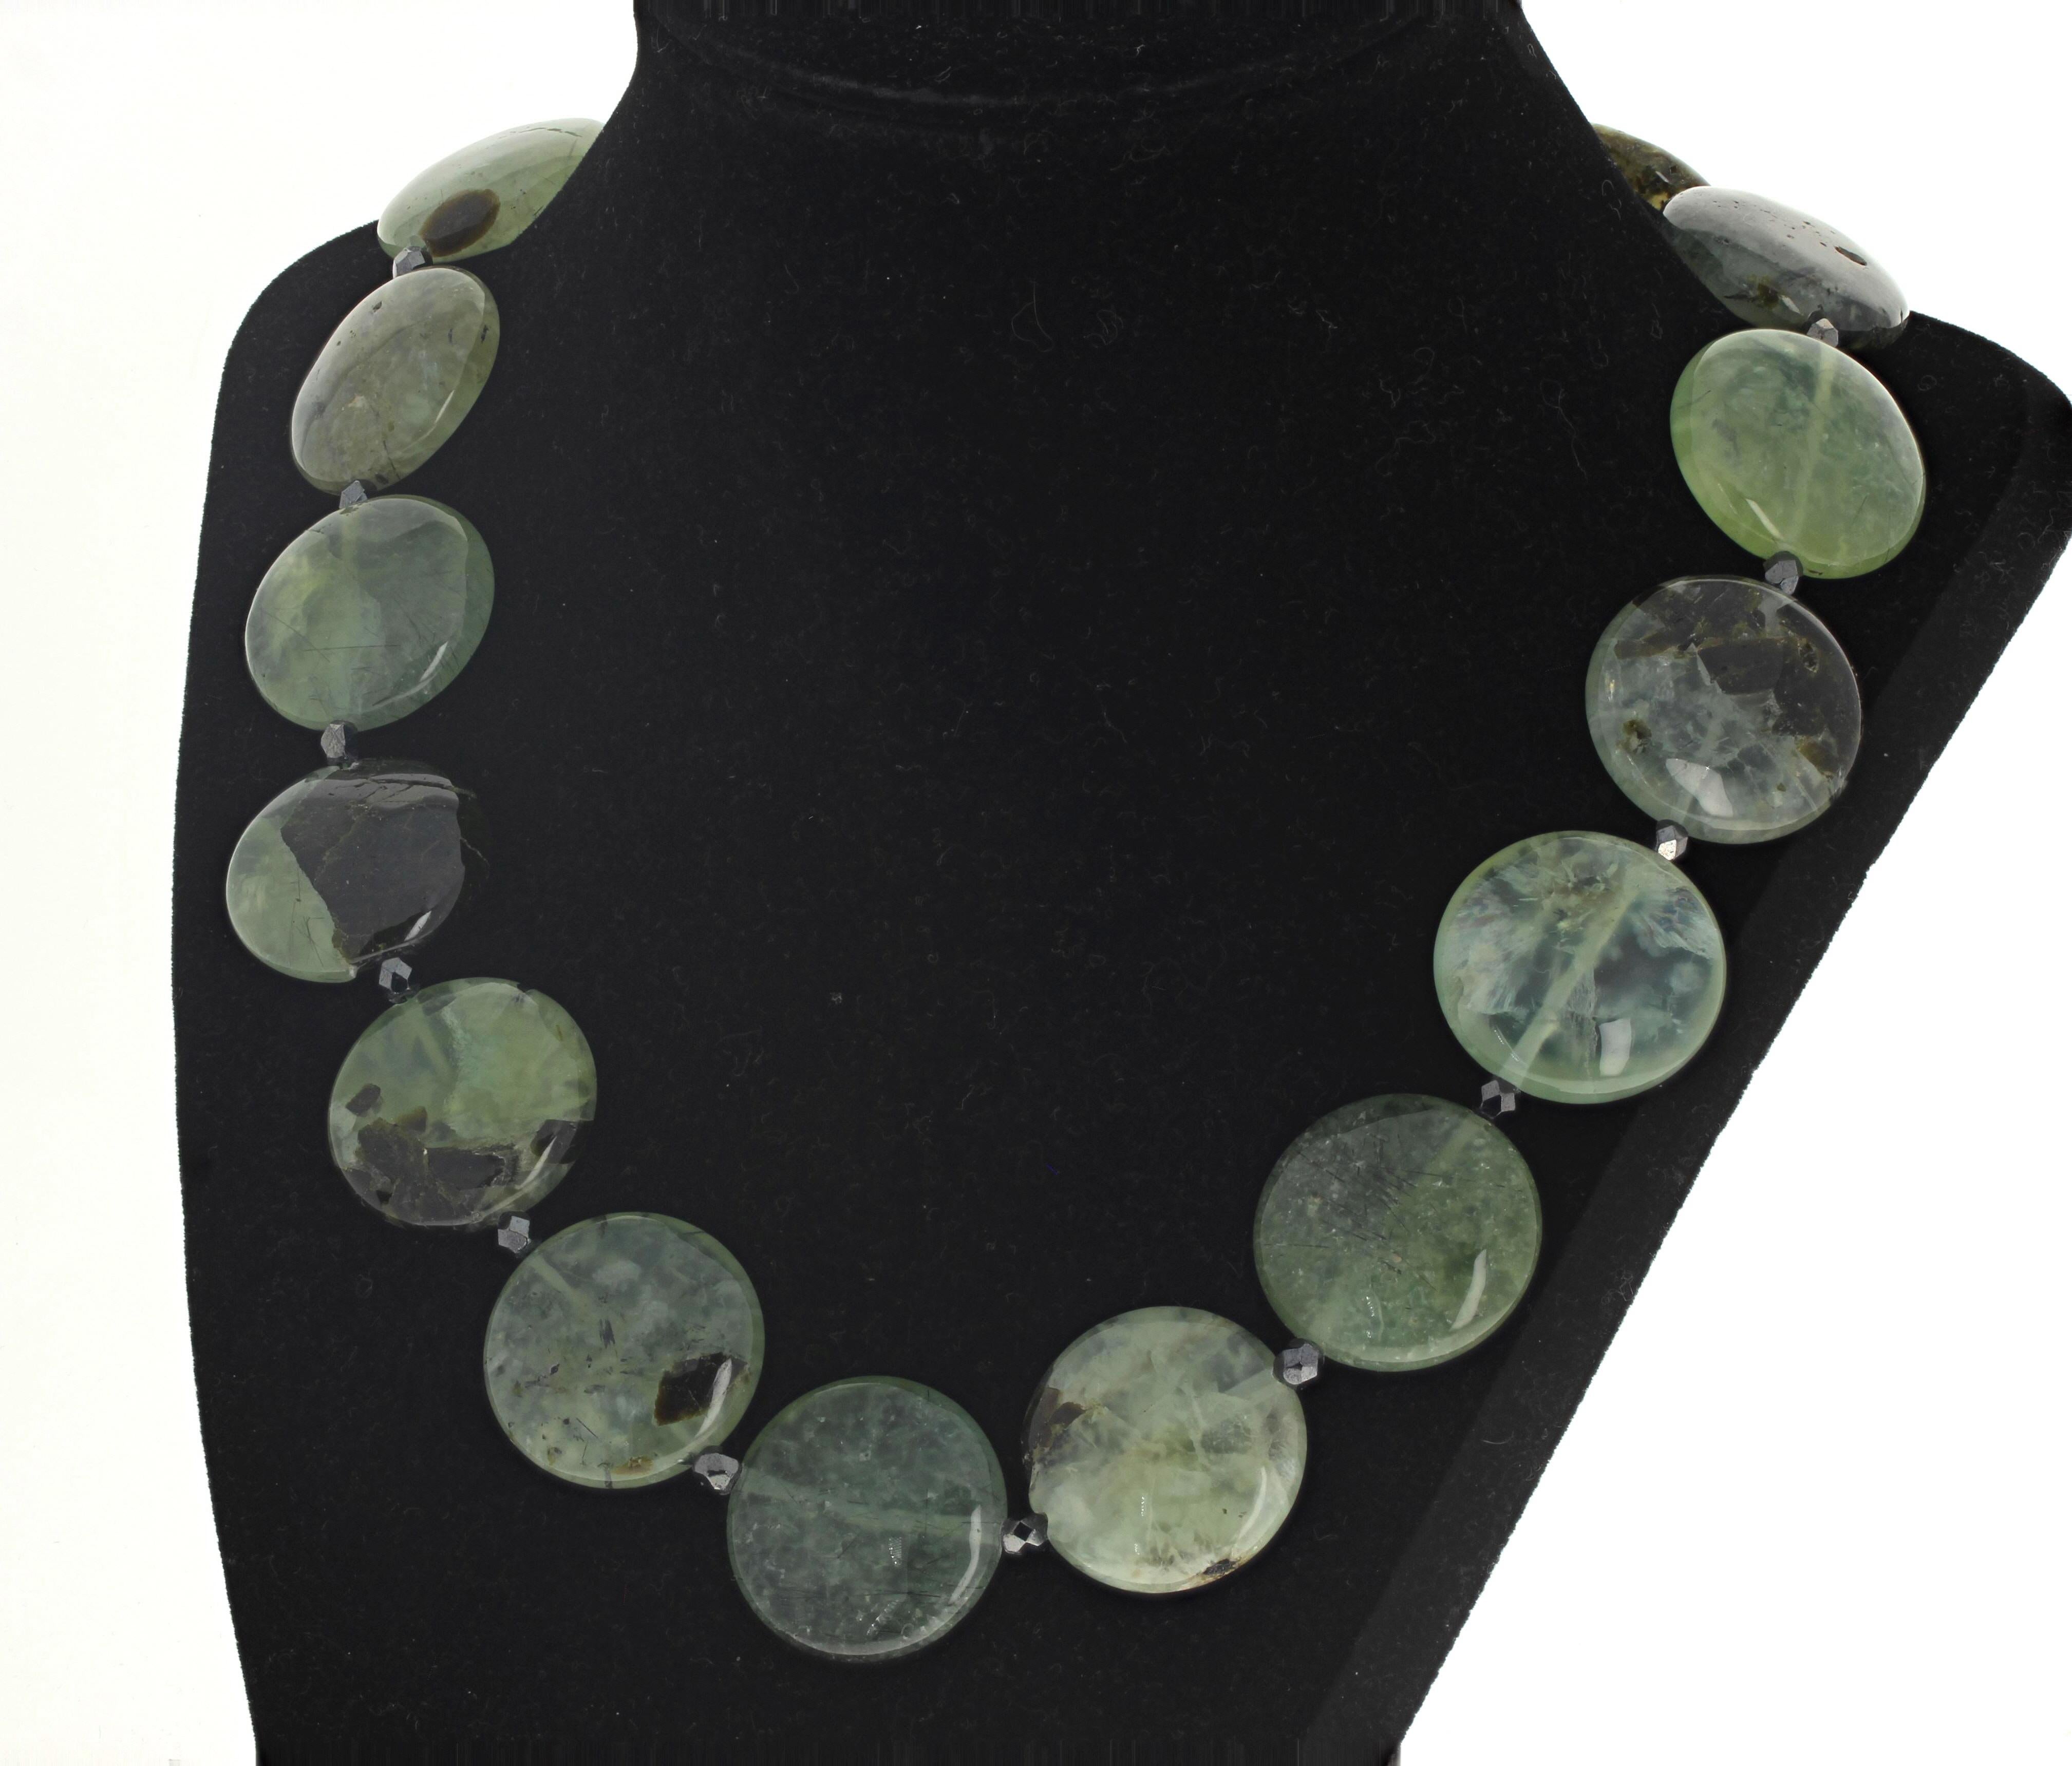 Women's or Men's AJD Beautiful Natural Dramatically Artistic Real Prehnite Rondels Necklace For Sale